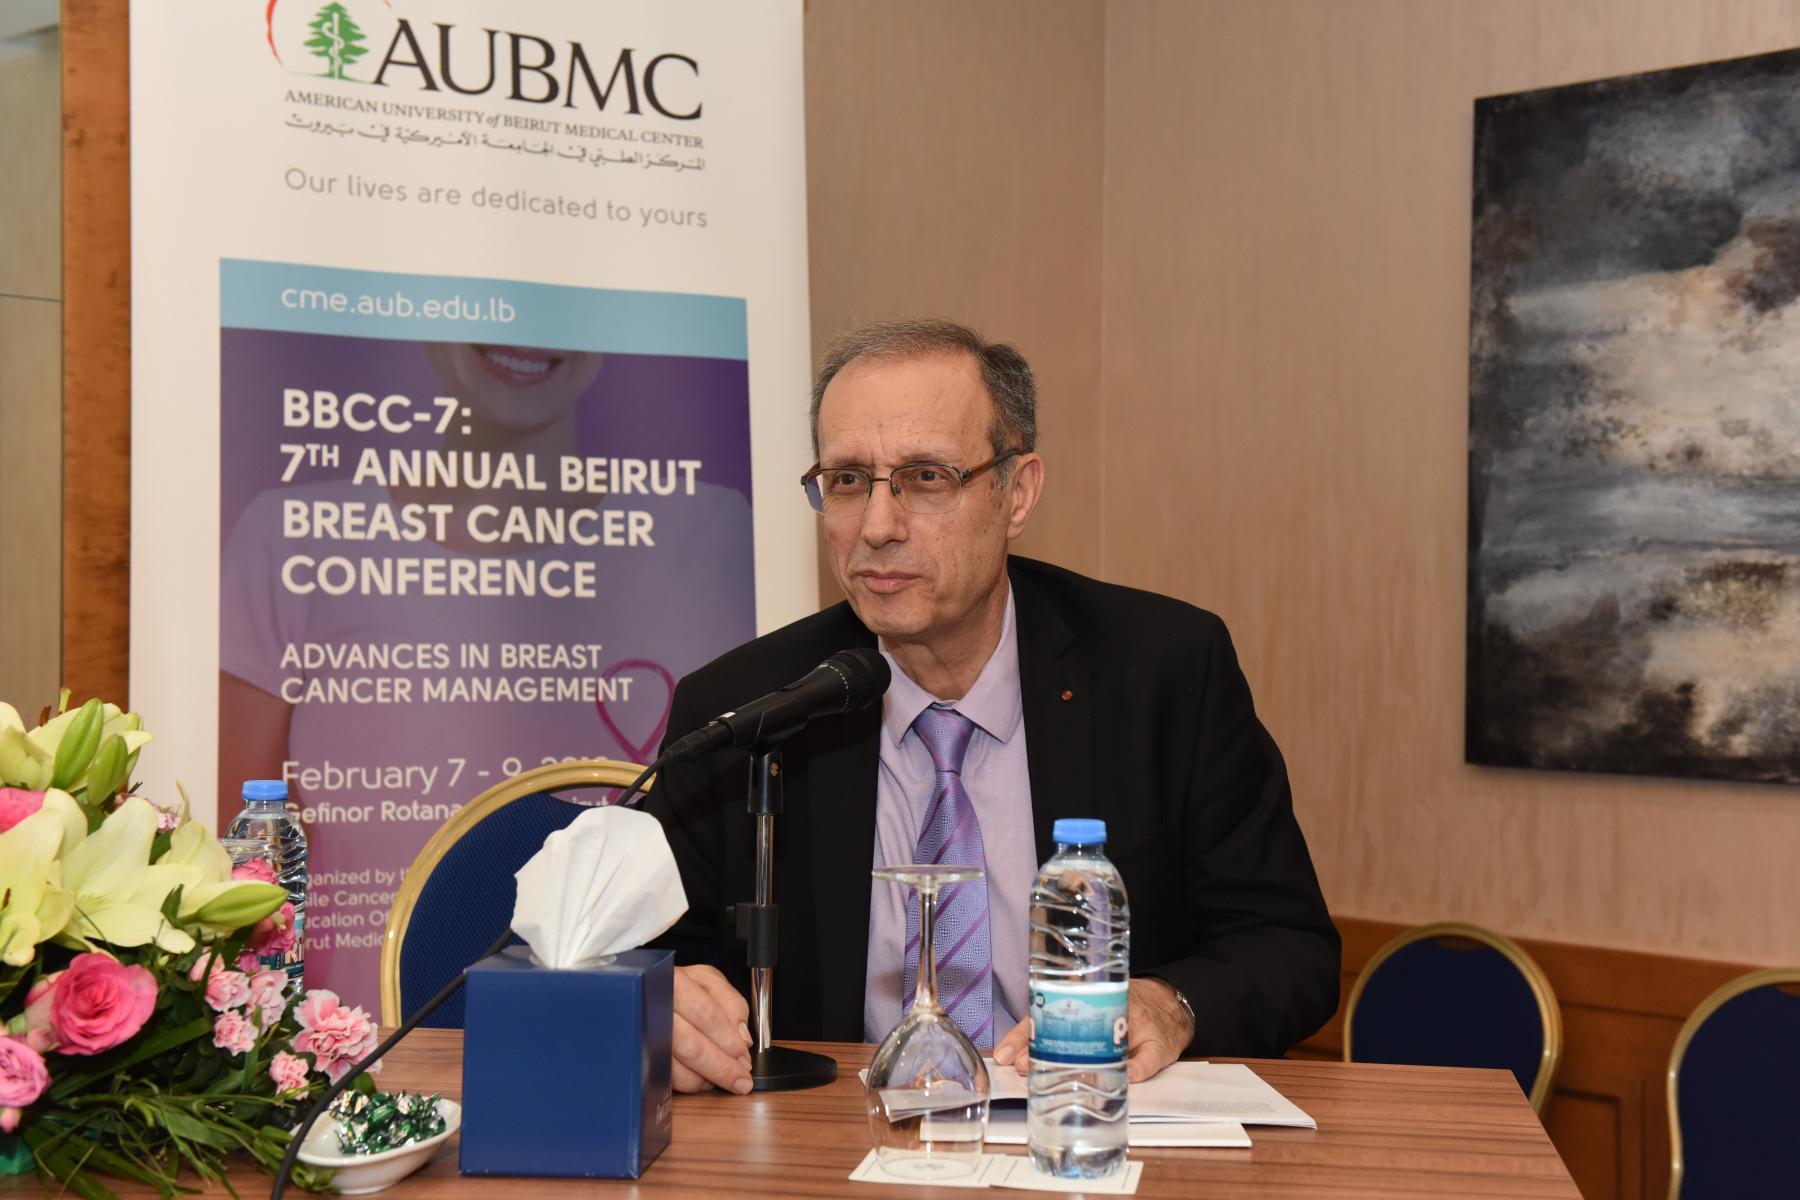 Dr. El Saghir at the microphone during a BBCC-7 session.